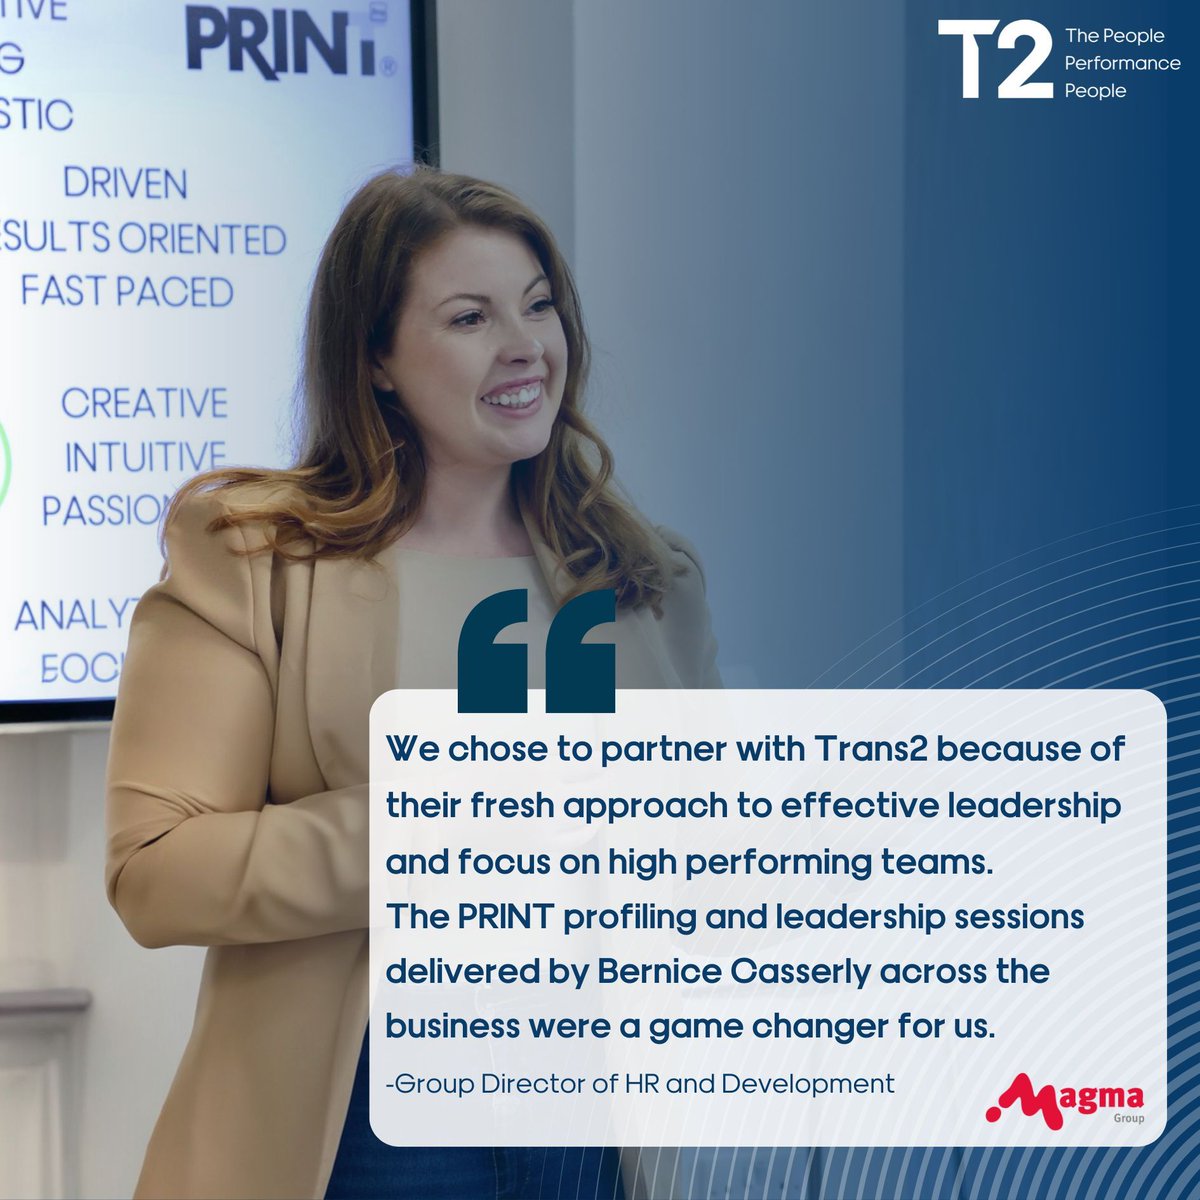 It is fantastic to hear how PRINT® and workshops led by T2 consultant Bernice Casserly have had such a positive impact on leaders at Magma Group in understanding themselves and how and why their behaviour impacts on team performance.